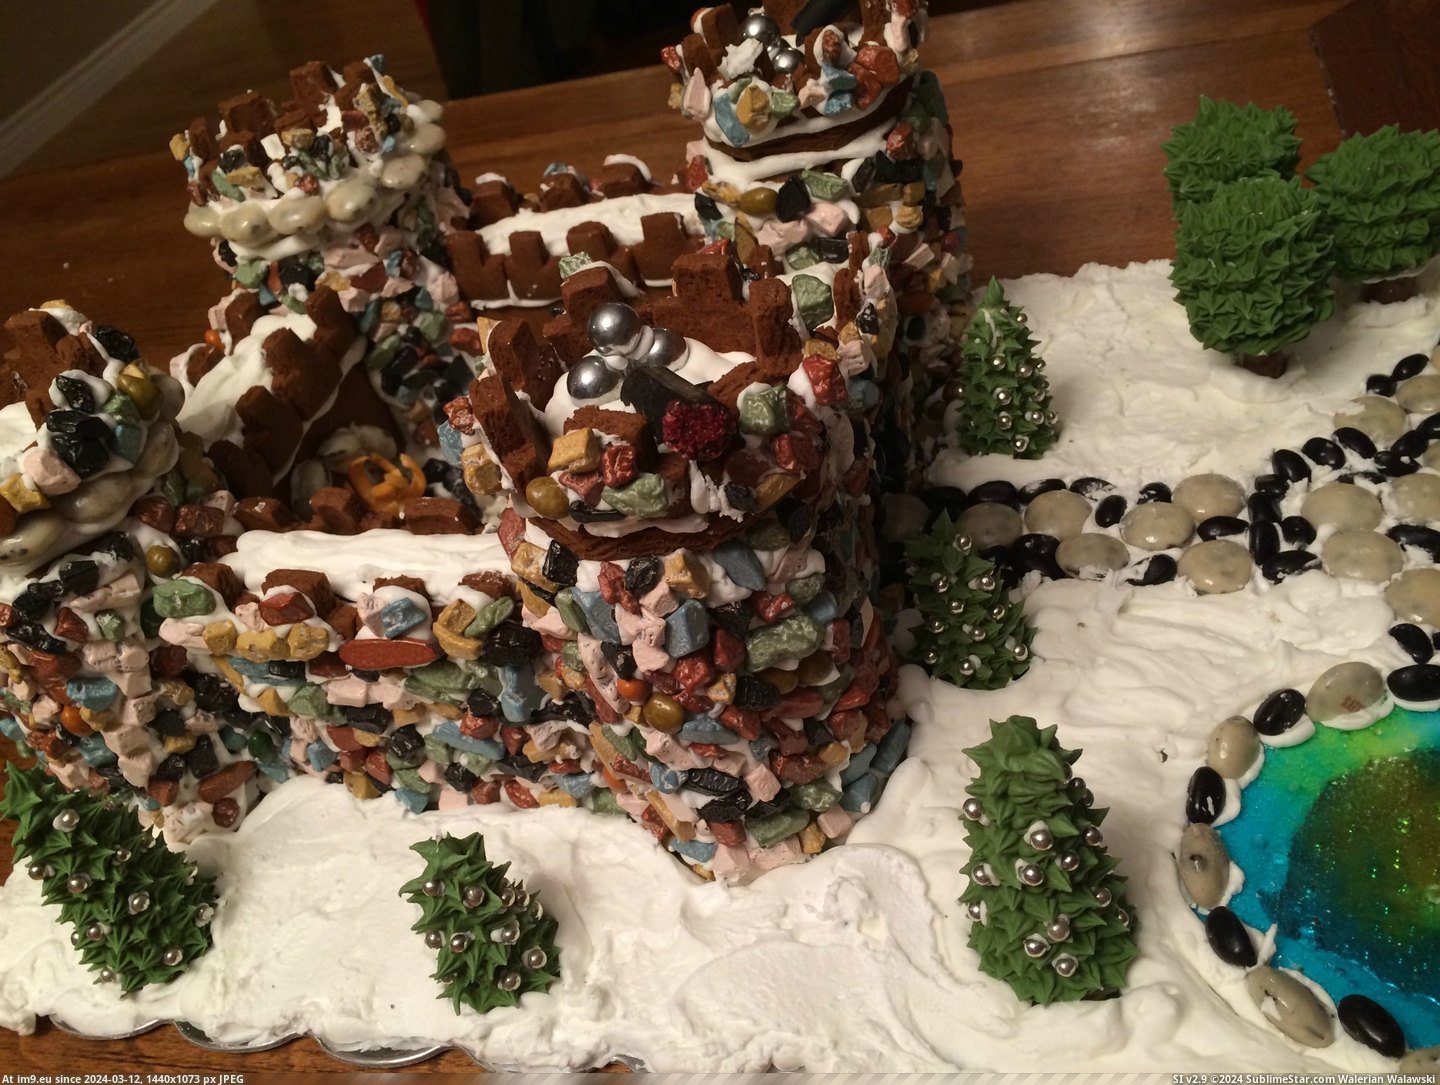 #Husband #Get #Our #Divorced #Collaborated #Project #Gingerbread #Success [Pics] My husband and I collaborated on our first gingerbread project and didn't get divorced...success! 9 Pic. (Bild von album My r/PICS favs))